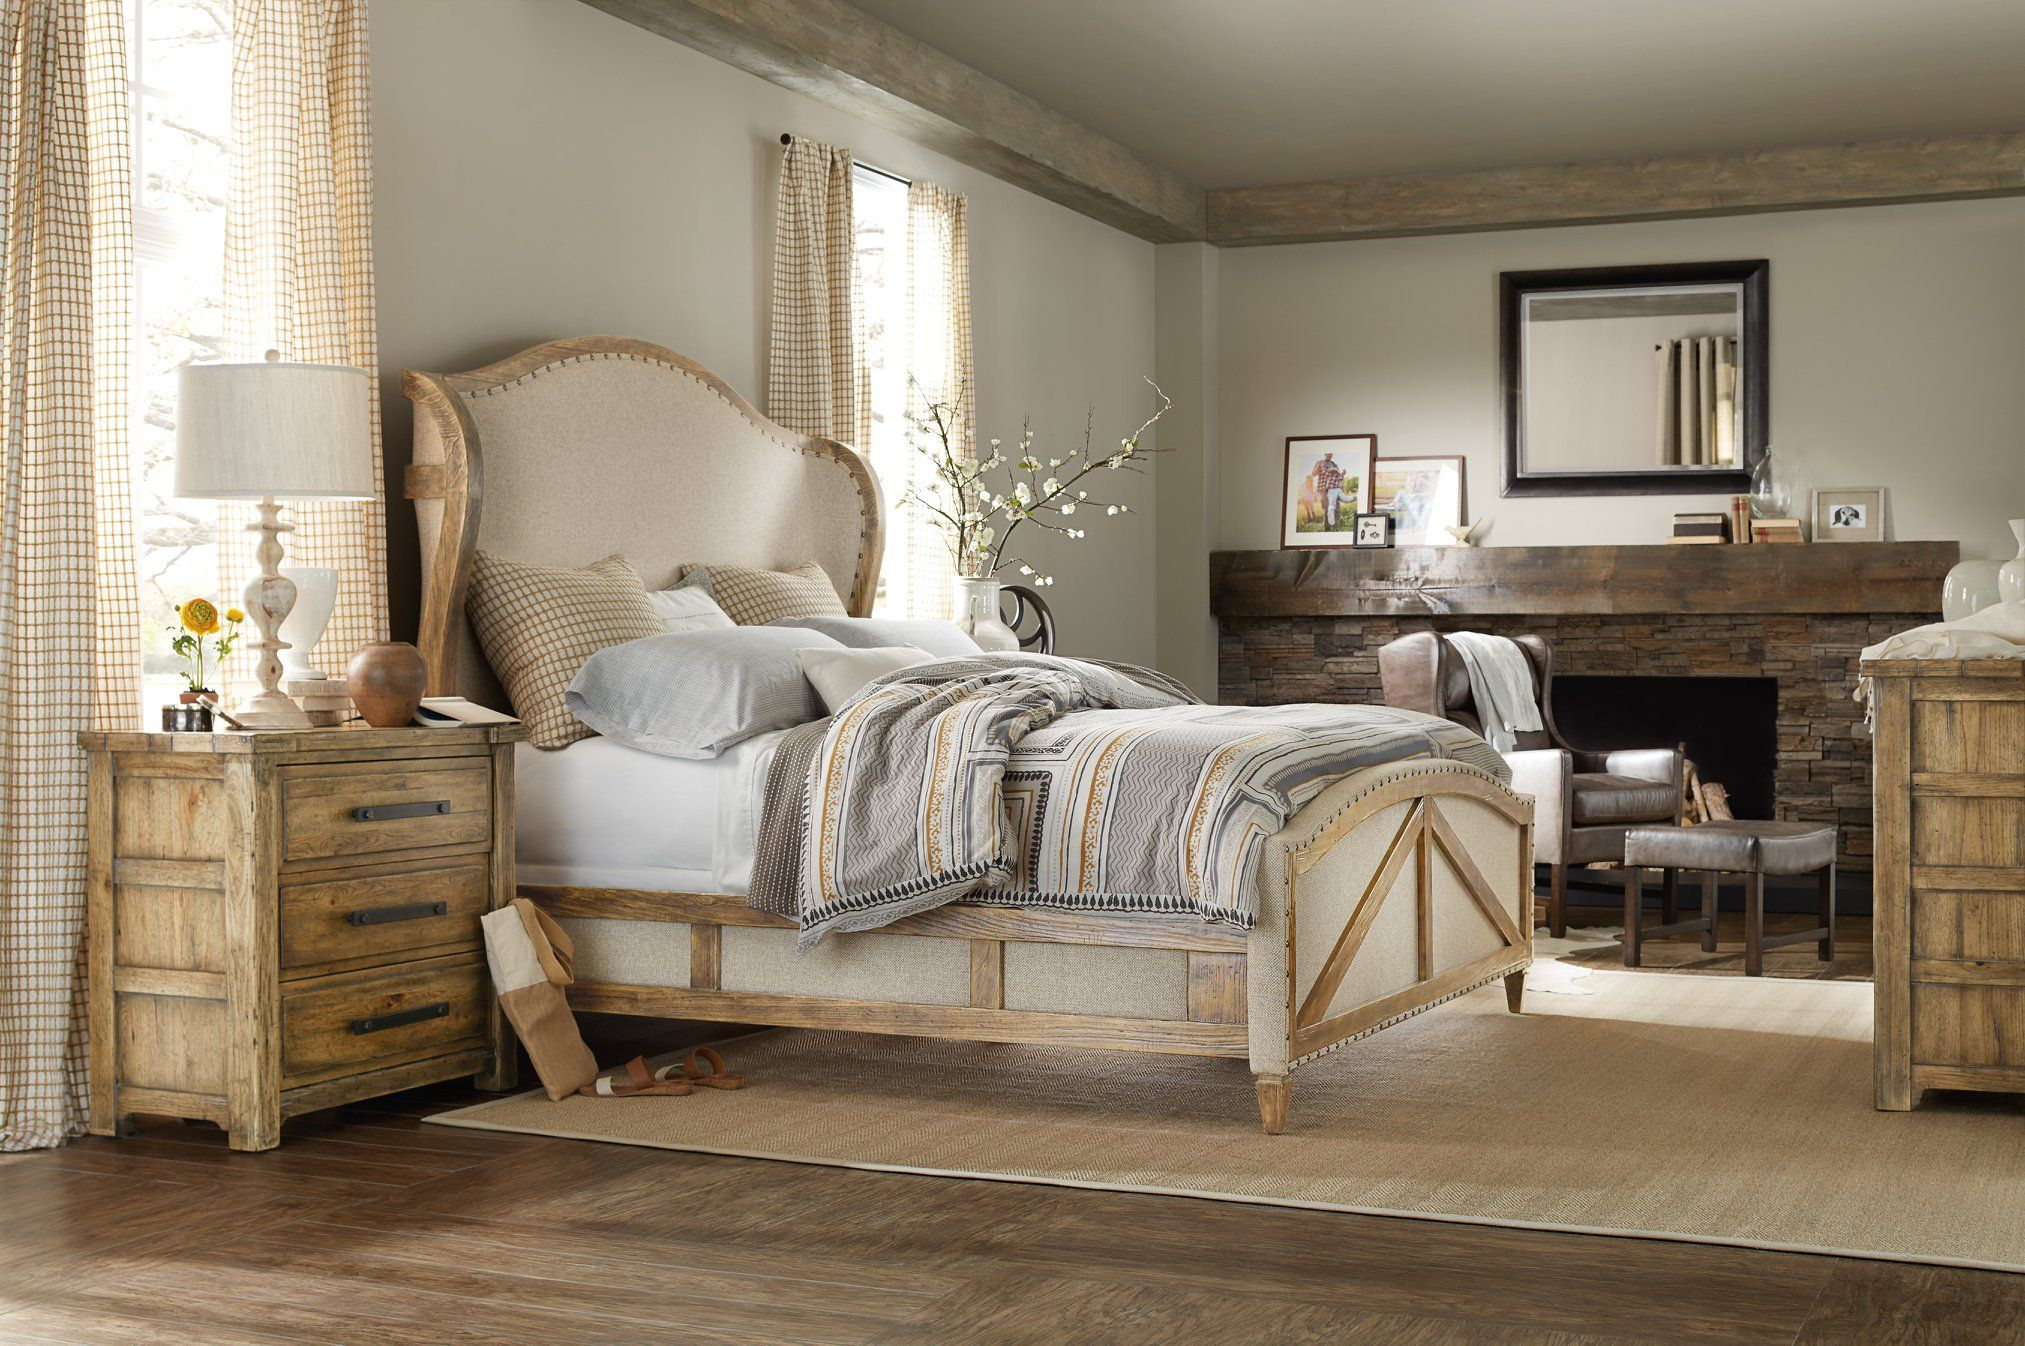 Rustic Design Inspiration Hooker Furniture Pieces Available Here for dimensions 2025 X 1346